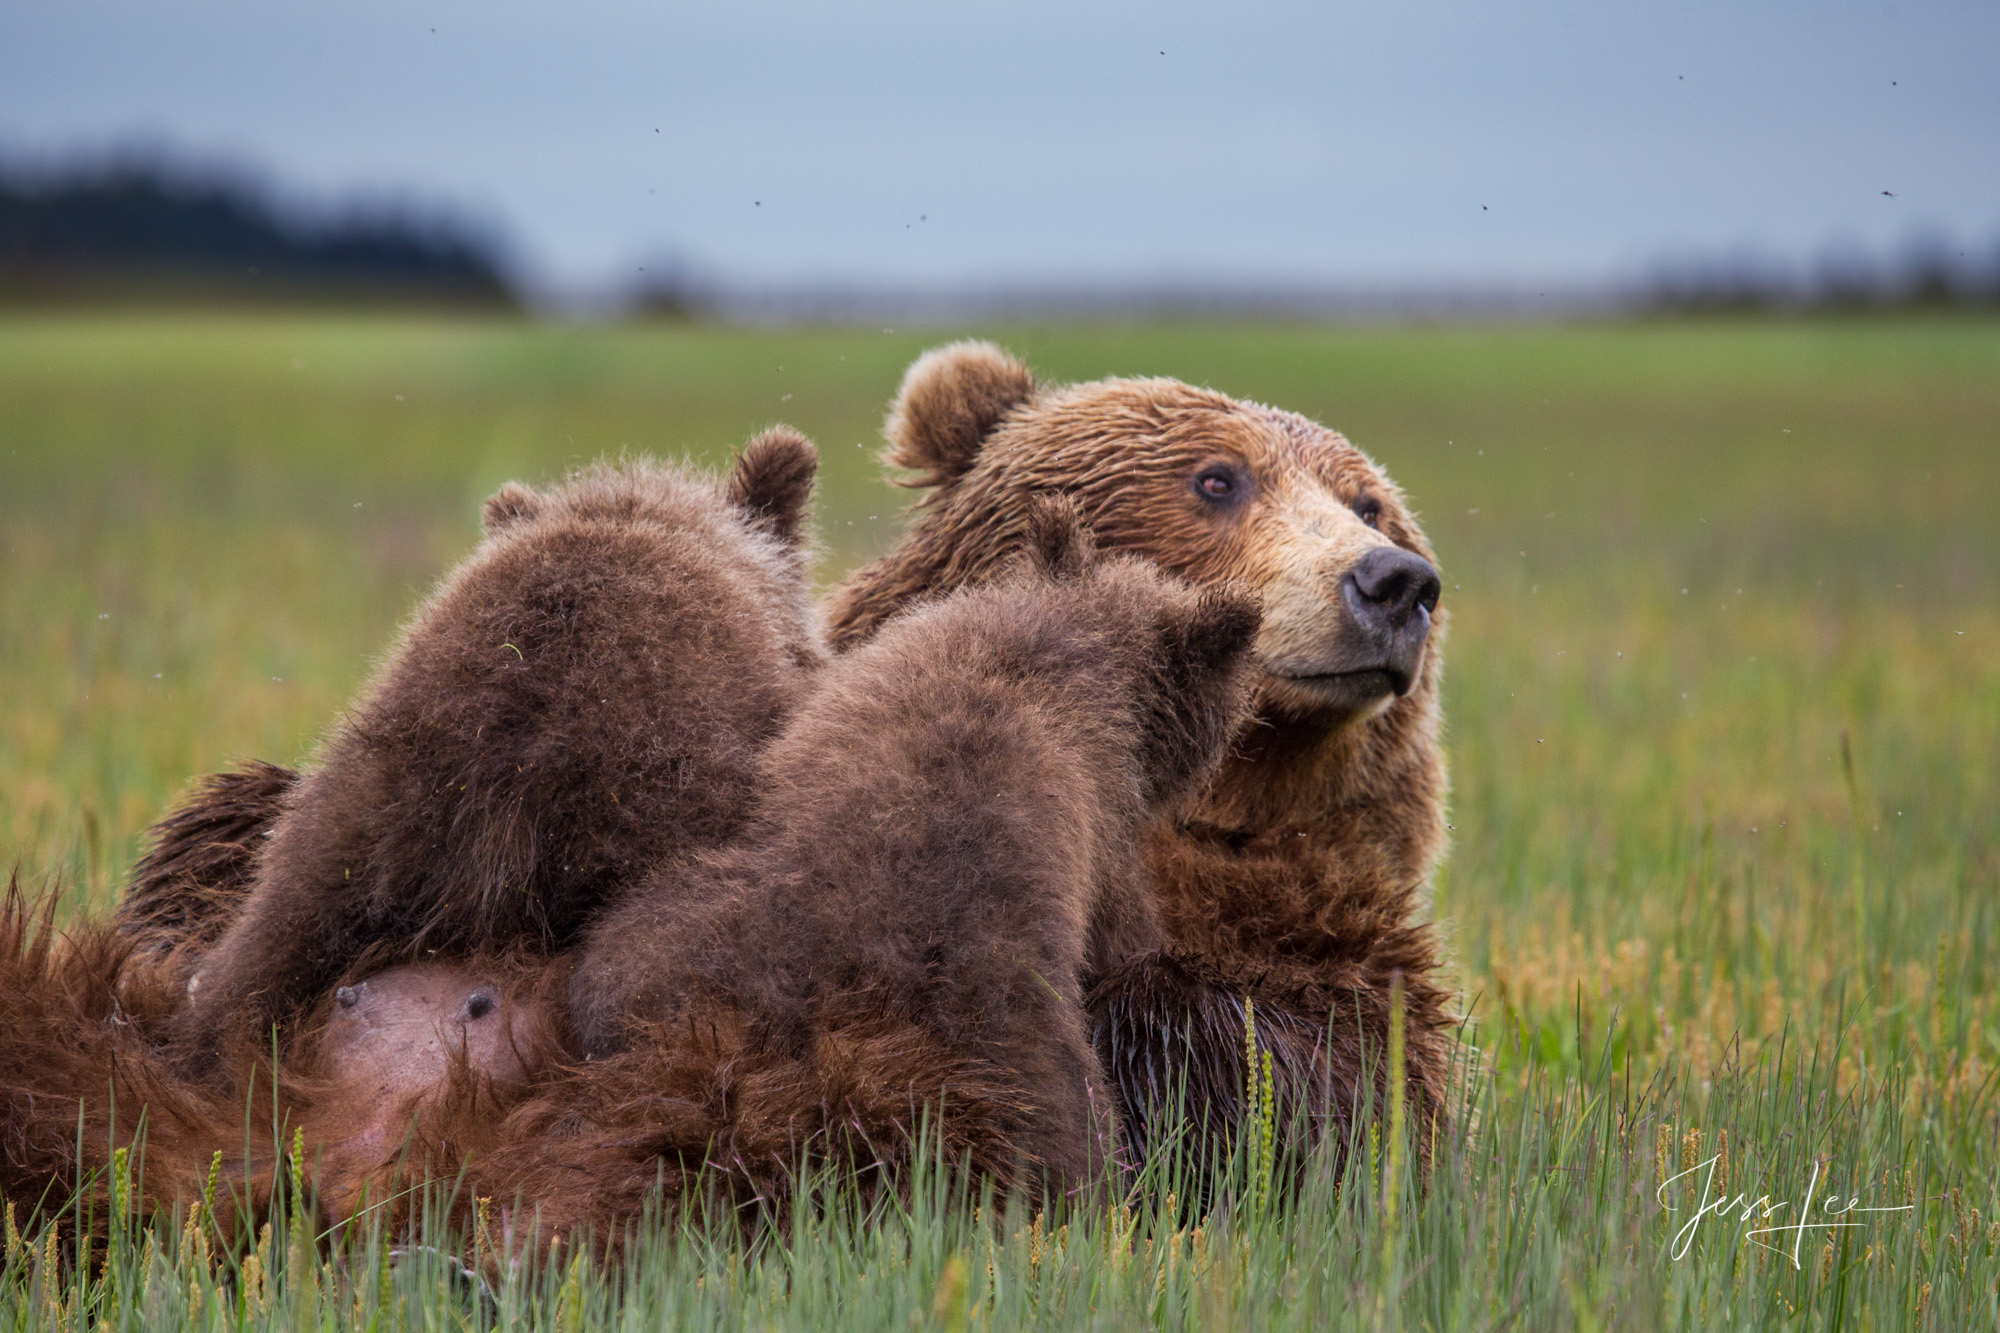 Alaska Grizzly Nursing two cubs closeup and personal, a Limited edition of 800 prints. These Grizzly bear fine art wildlife photographs...